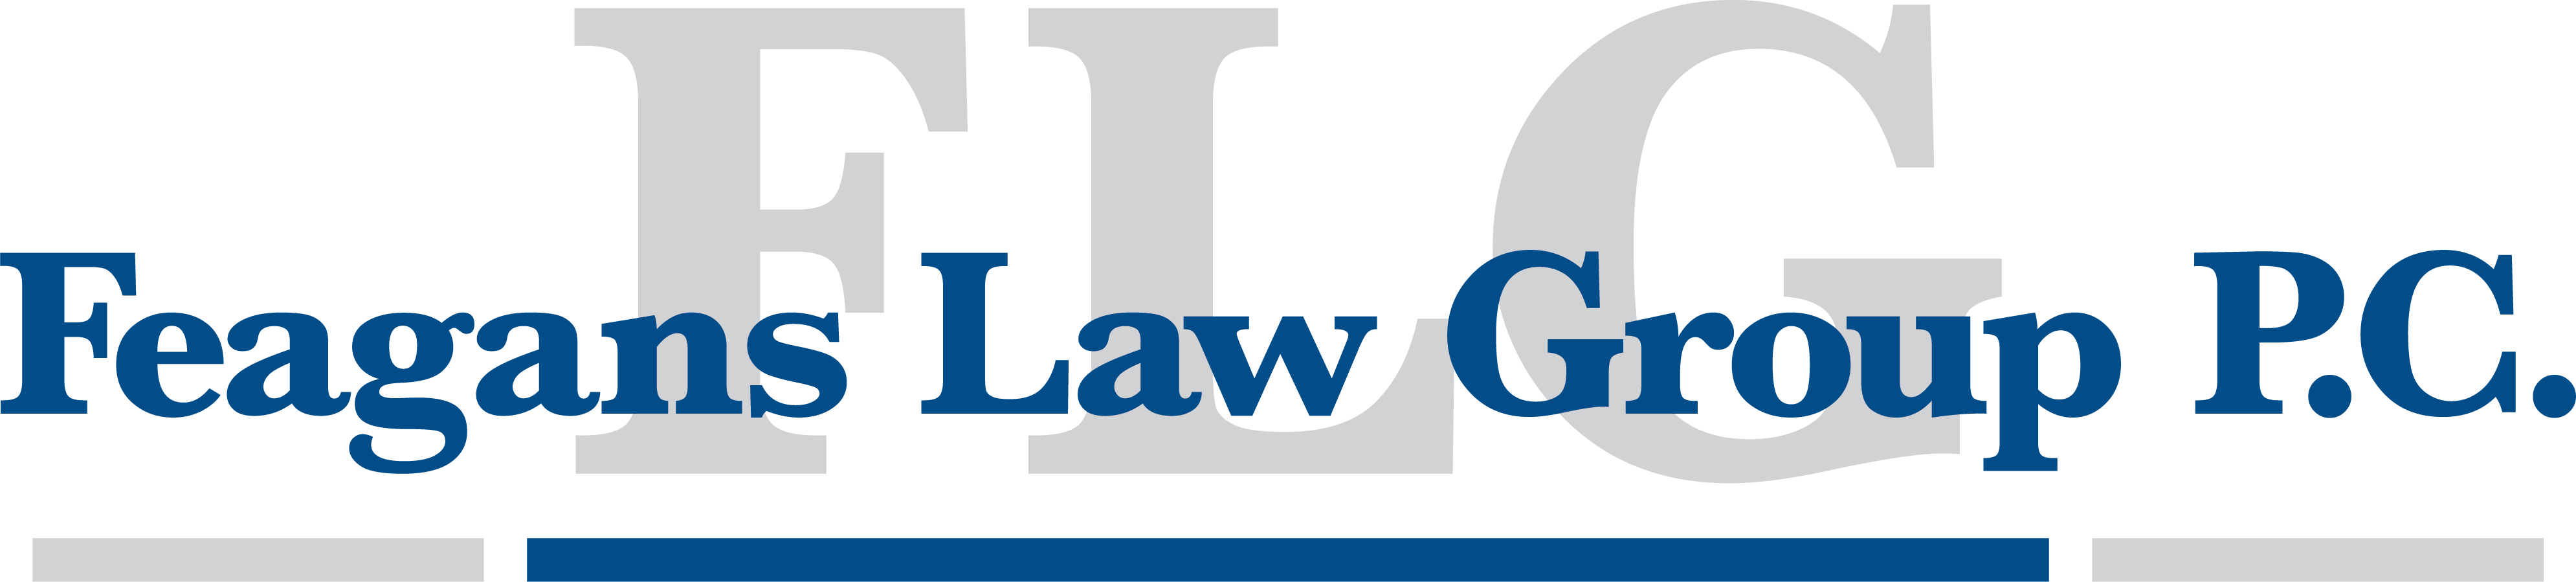 Feagans Law Group | Personal Injury Attorneys